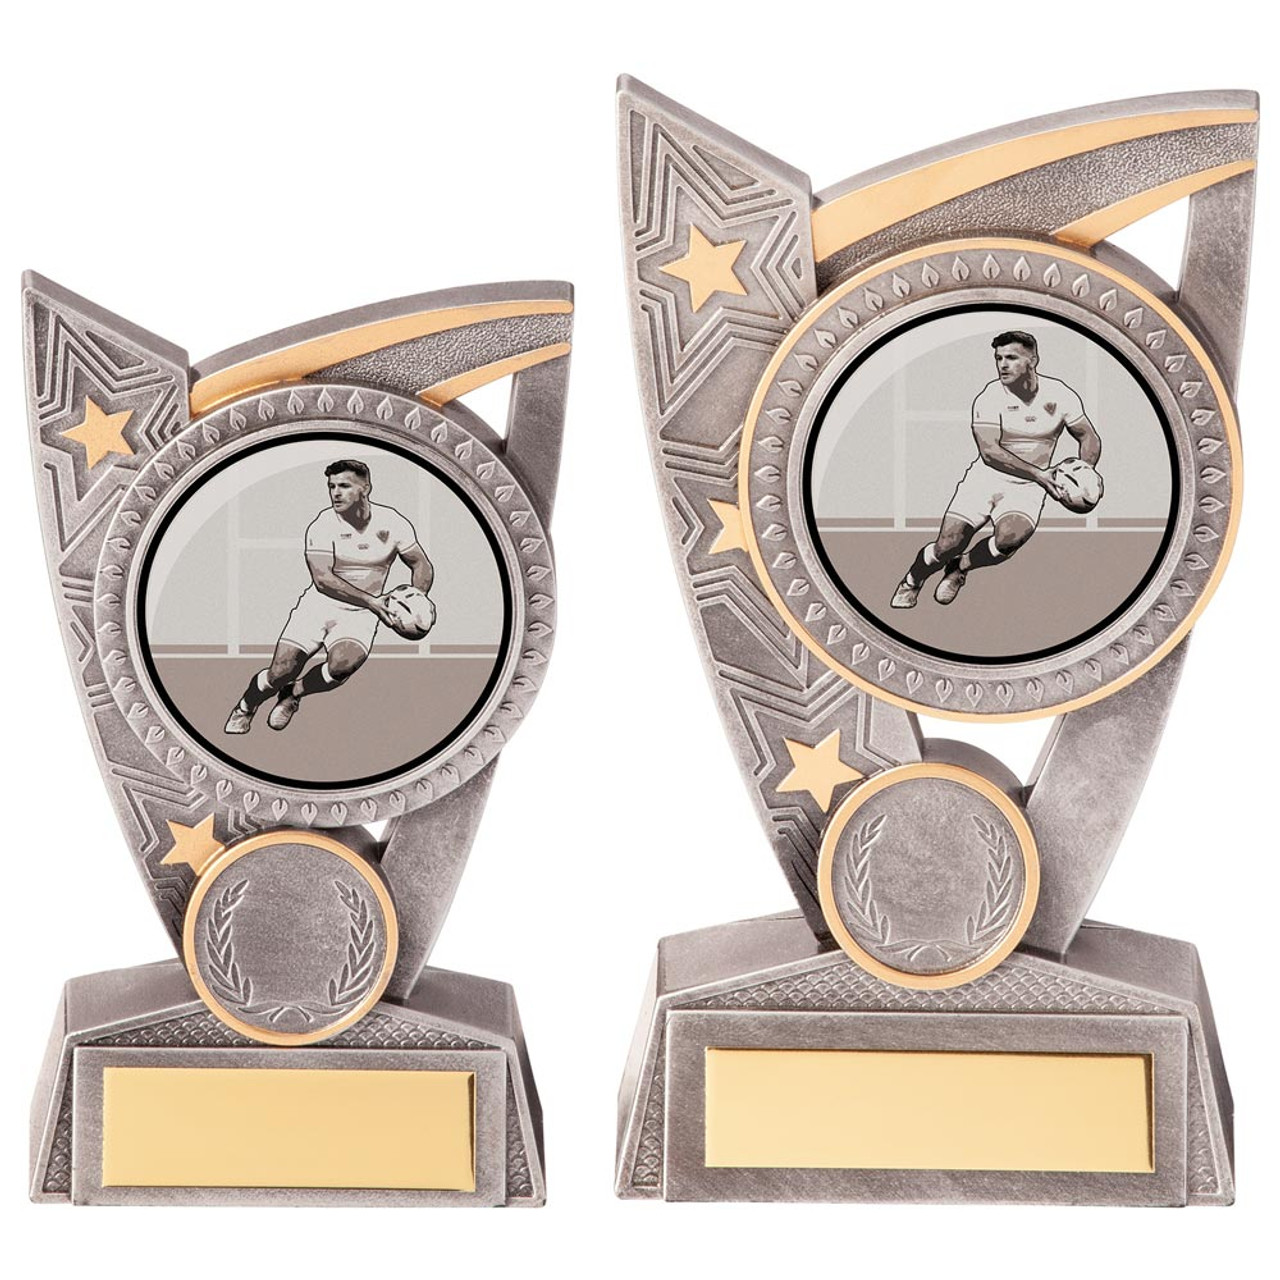 Football Club Silver & Gold Triumph Match Games Award With Free Engraving in 2 Sizes